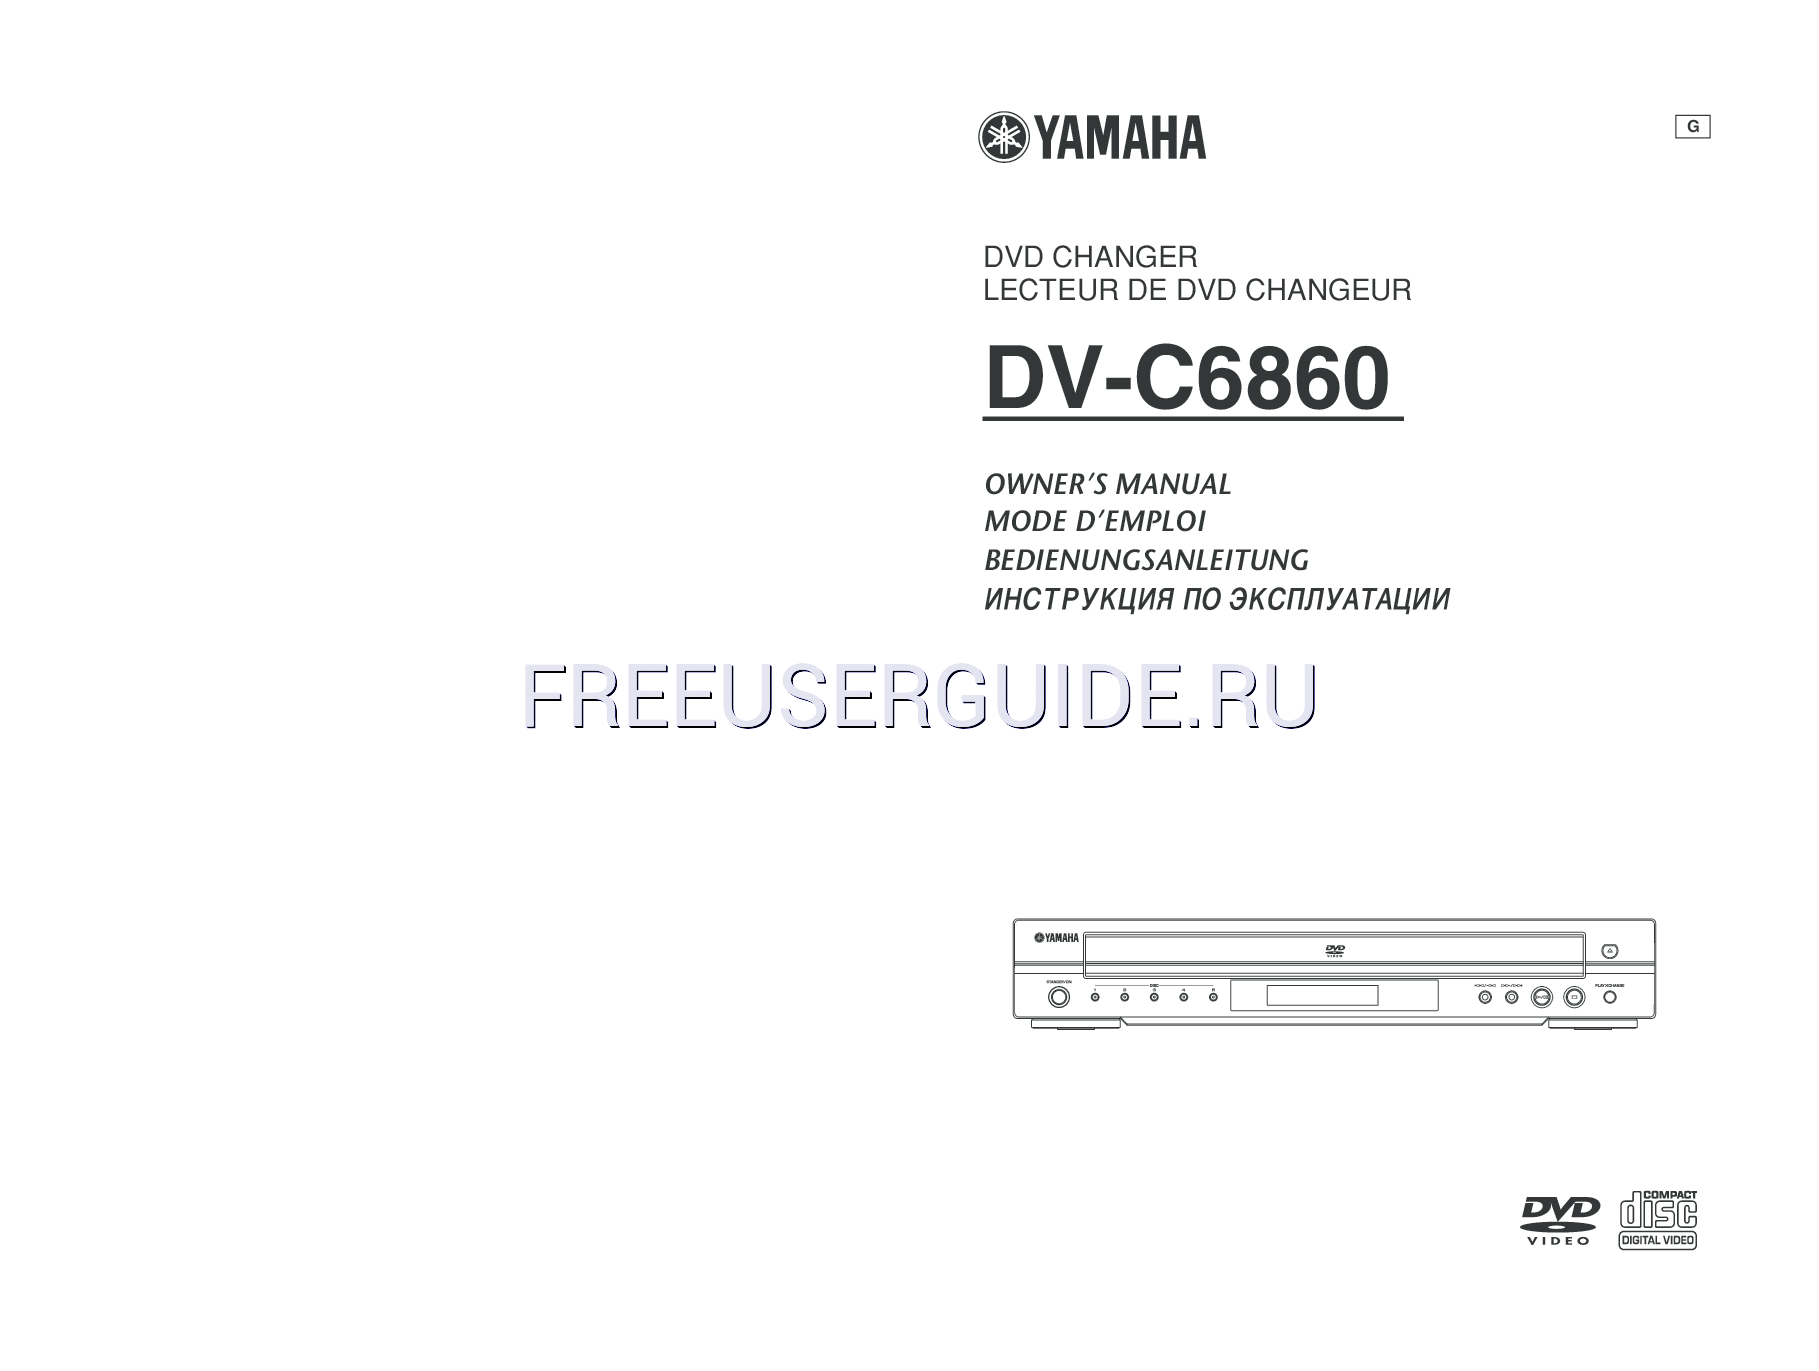 Read online User's Manual for Yamaha DV-C6860 (Page 1)